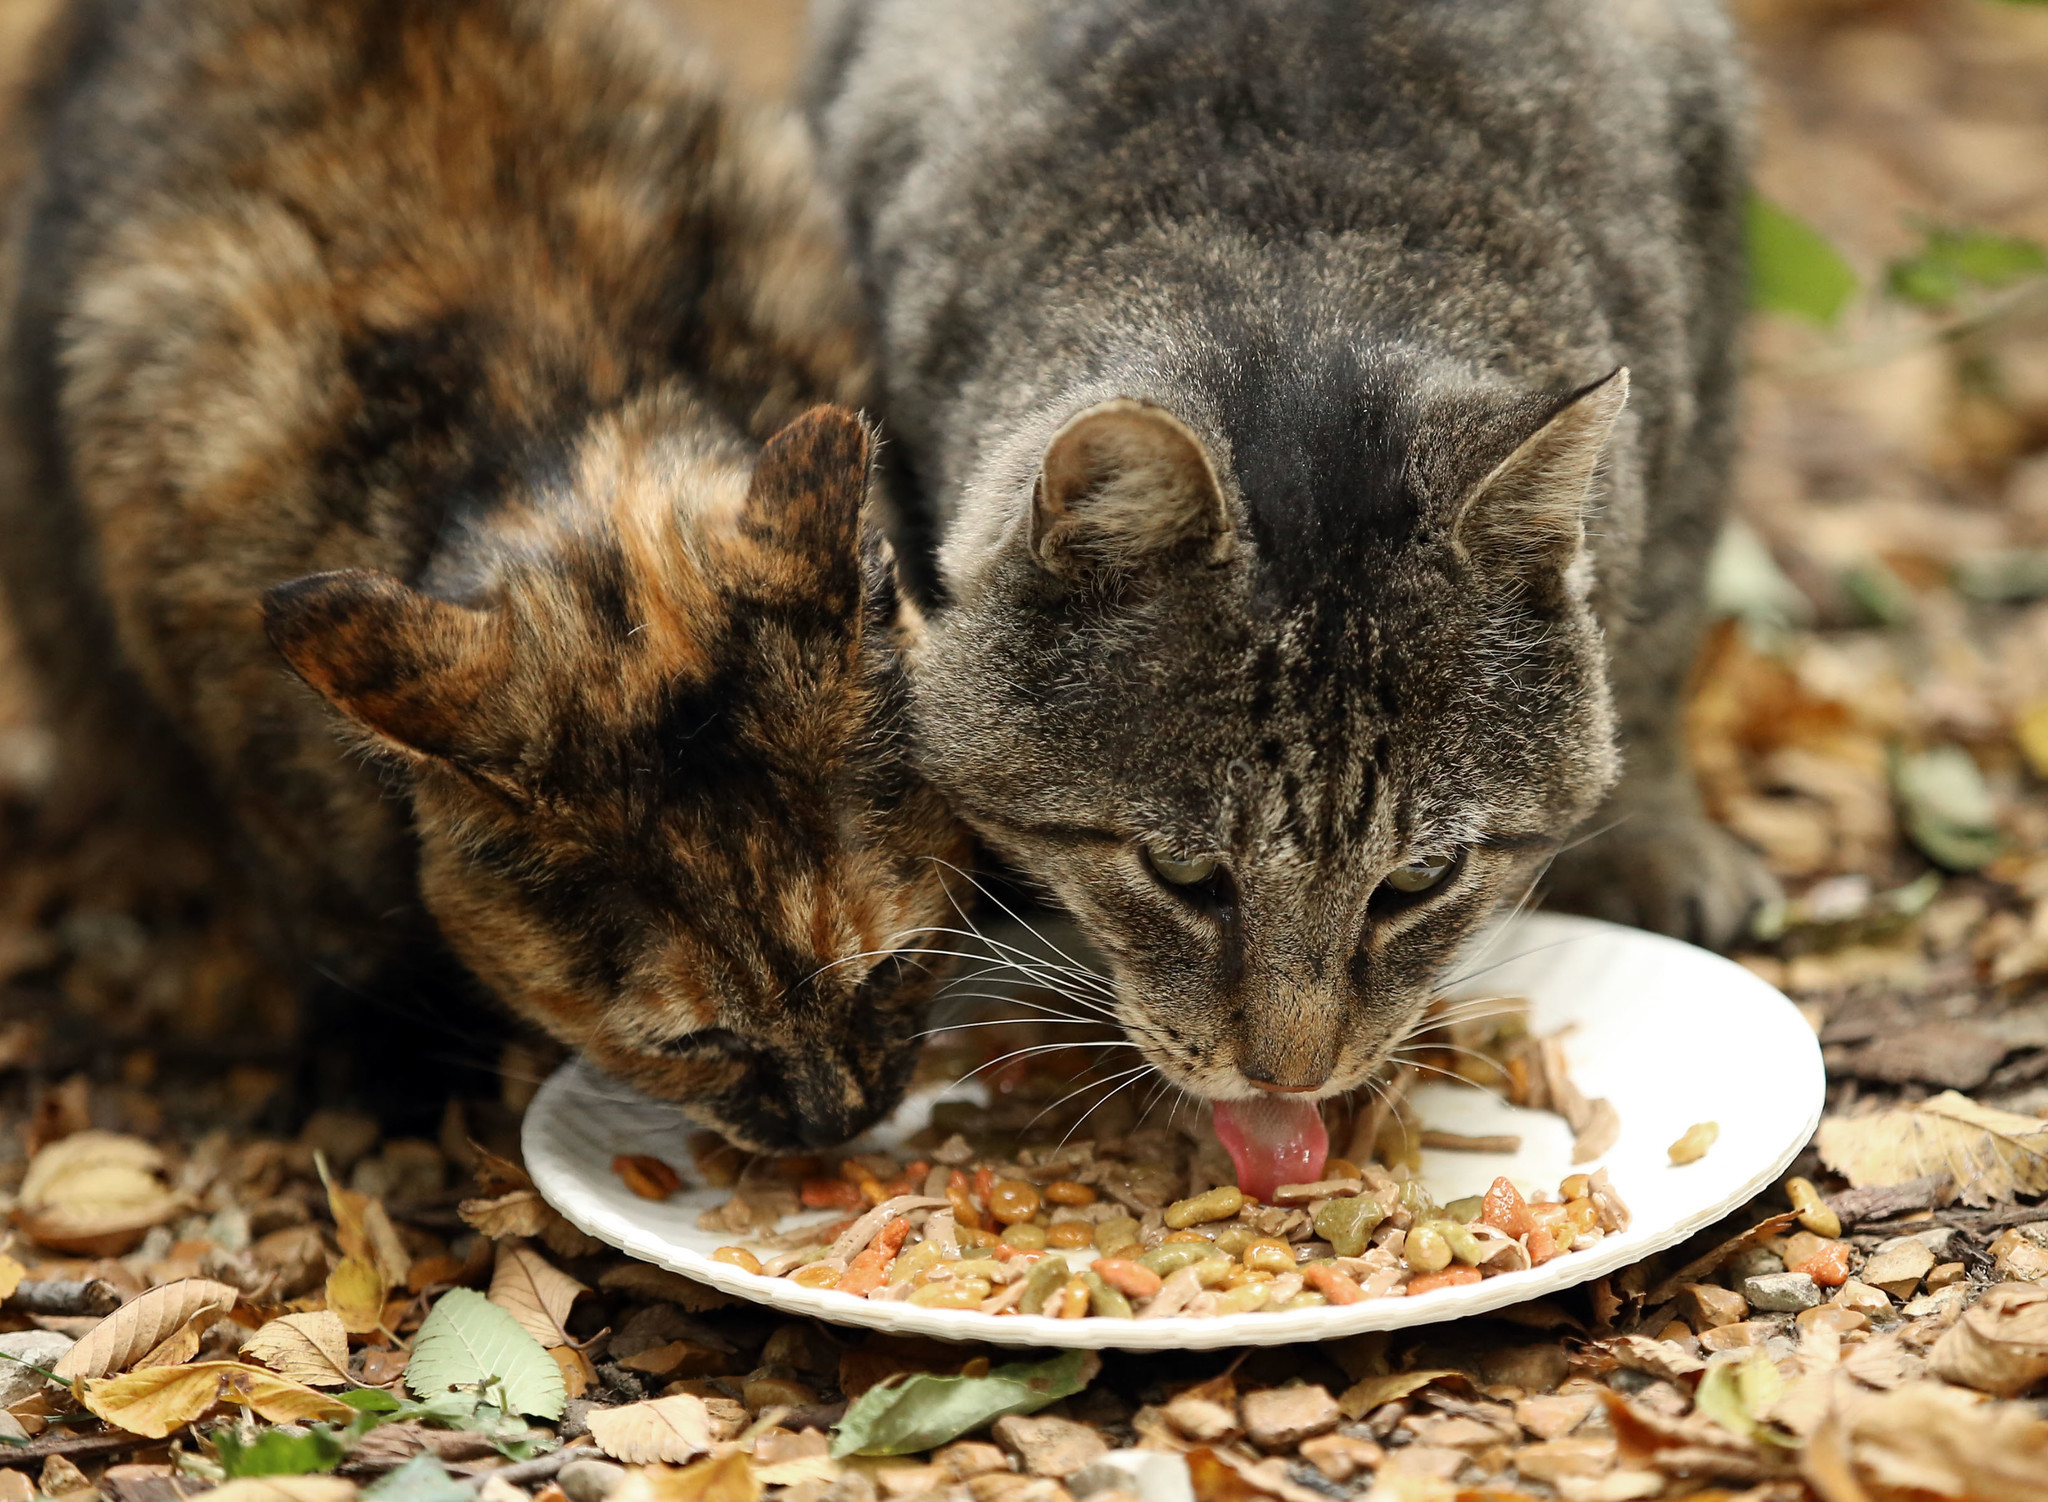 If you feed feral cats, please sterilize them too Chicago Tribune